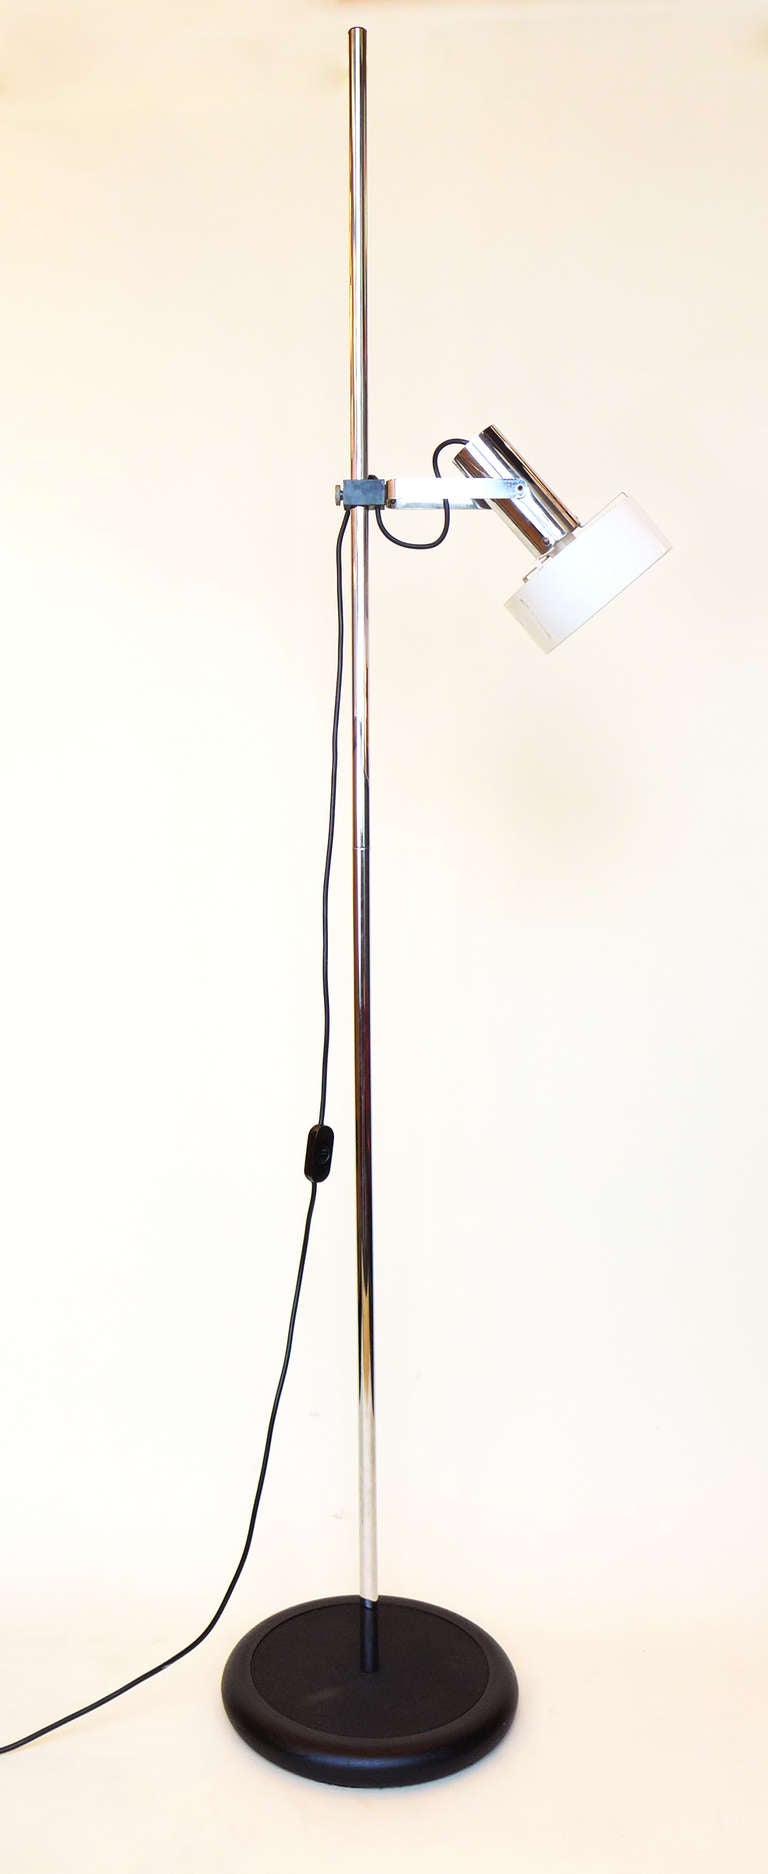 1960s Stilnovo adjustable floor lamp. The base and pole are fixed, while the actual lamp swivels to point up, down, or straight forward. It also swings all the way around and can be elevated or lowered on the pole itself. Chrome finish to the pole,